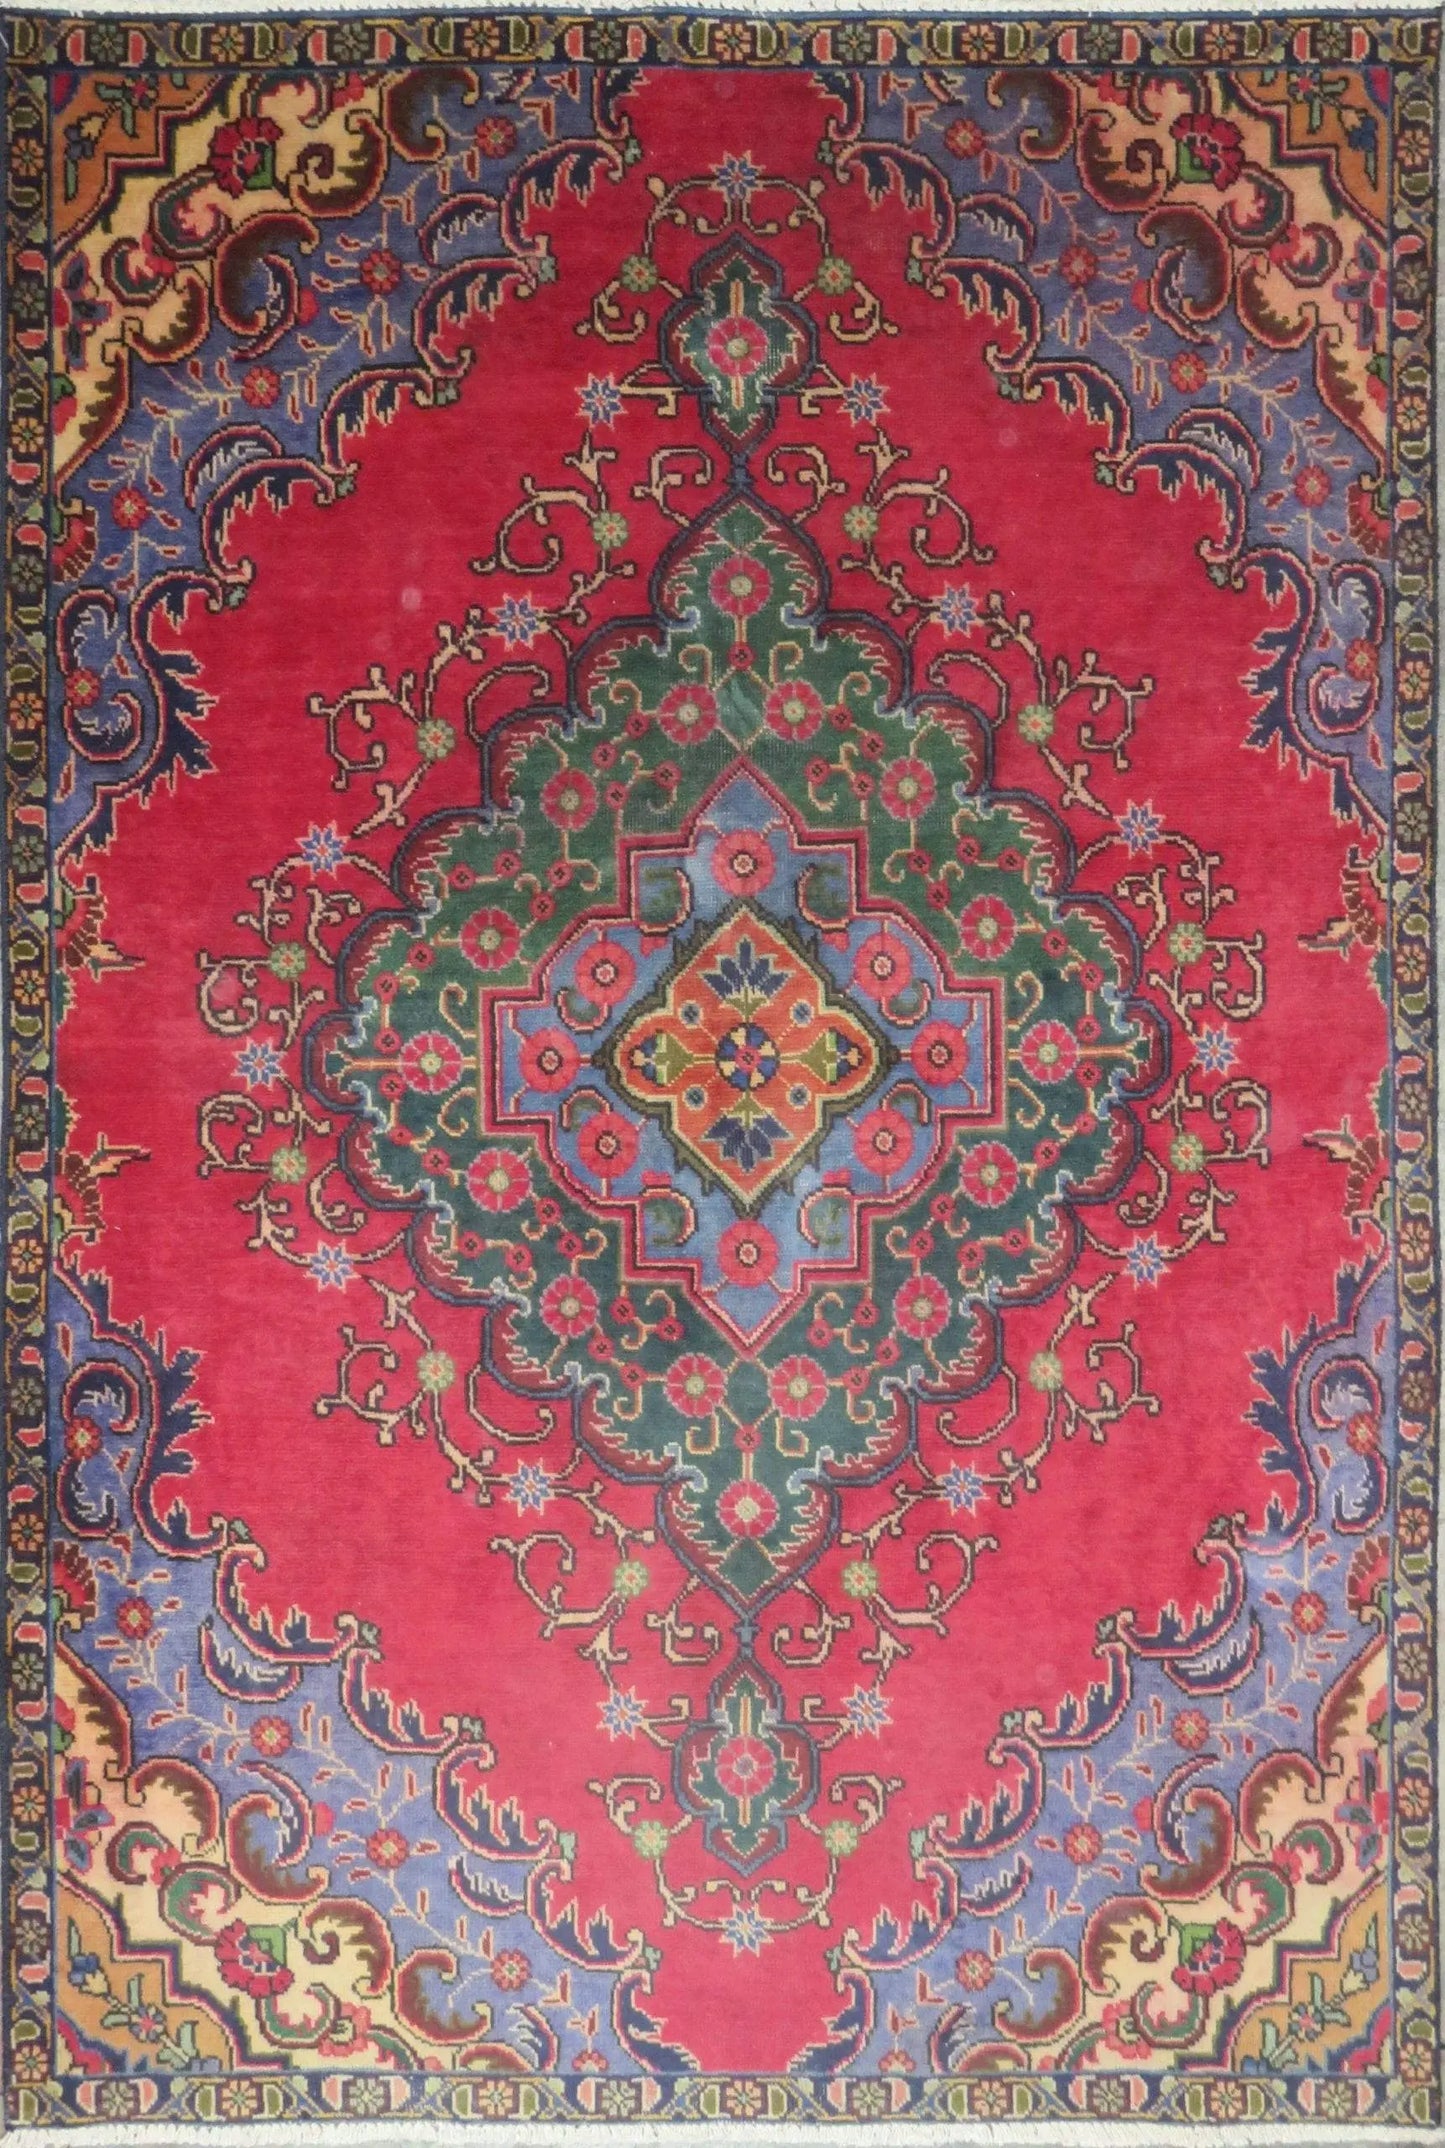 Hand-Knotted Persian Wool Rug _ Luxurious Vintage Design, 7'7" x 5'2", Artisan Crafted